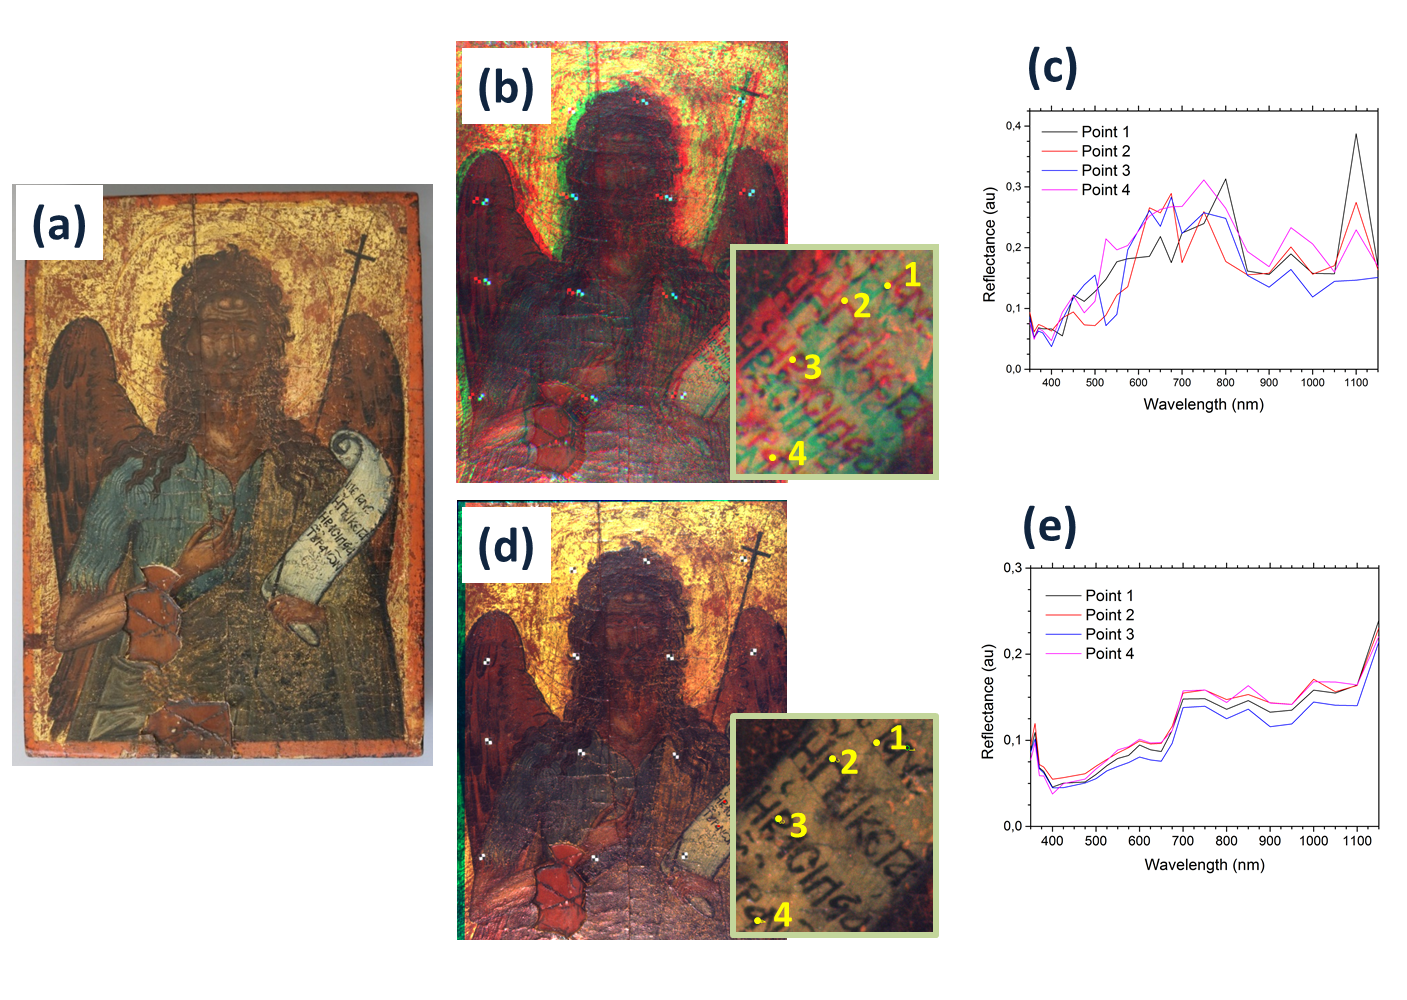 Figure 1: The effect of registration in the acquisition of multi-spectral images. (a) Conventional colour image of the object under study. (b) Synthesis of a colour image by combining the three unregistered spectral images at 450 nm (blue channel), 550 nm (green channel) and 650 nm (red channel) of the spectral cube. The observed blurring is due to misregistration. In (d), spectral images are registered before their combination and no blurring is observed. The area of study is magnified in b) and d) for higher detail. Graphs (c) and (e) plot the extracted spectra at four points, for the unregistered and registered spectral cubes, respectively. Due to registration, in (e), the extracted spectra are better aligned, indicating that the same pigment has been used at the four studied points. The checker markers in (b) and (d) were used only for evaluation and are not required by the registration method.